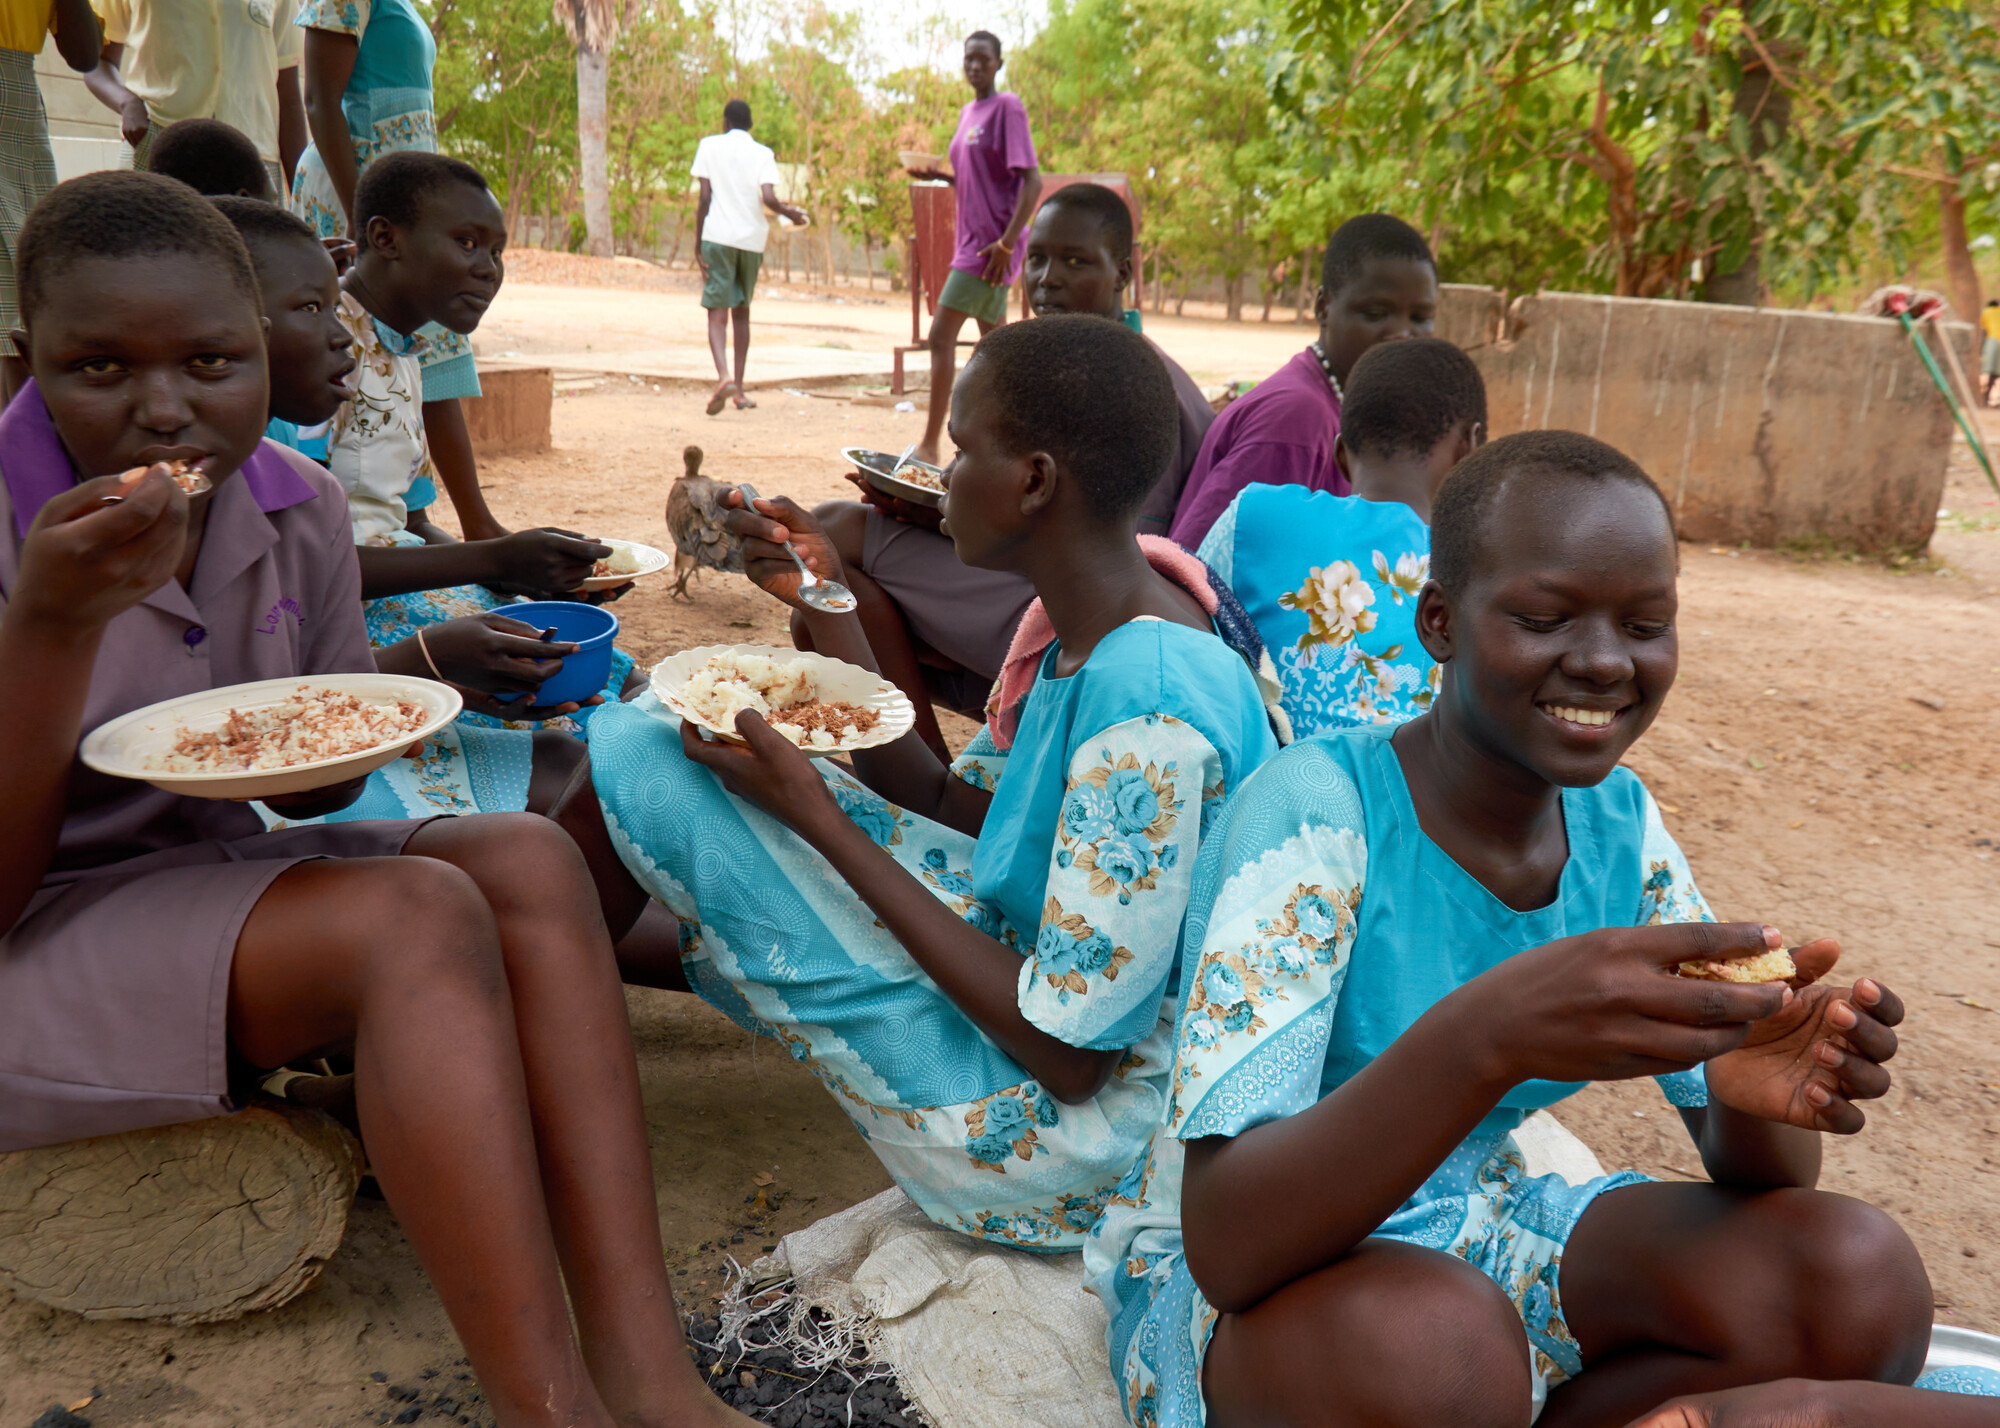 A group of young women eat a meal outside